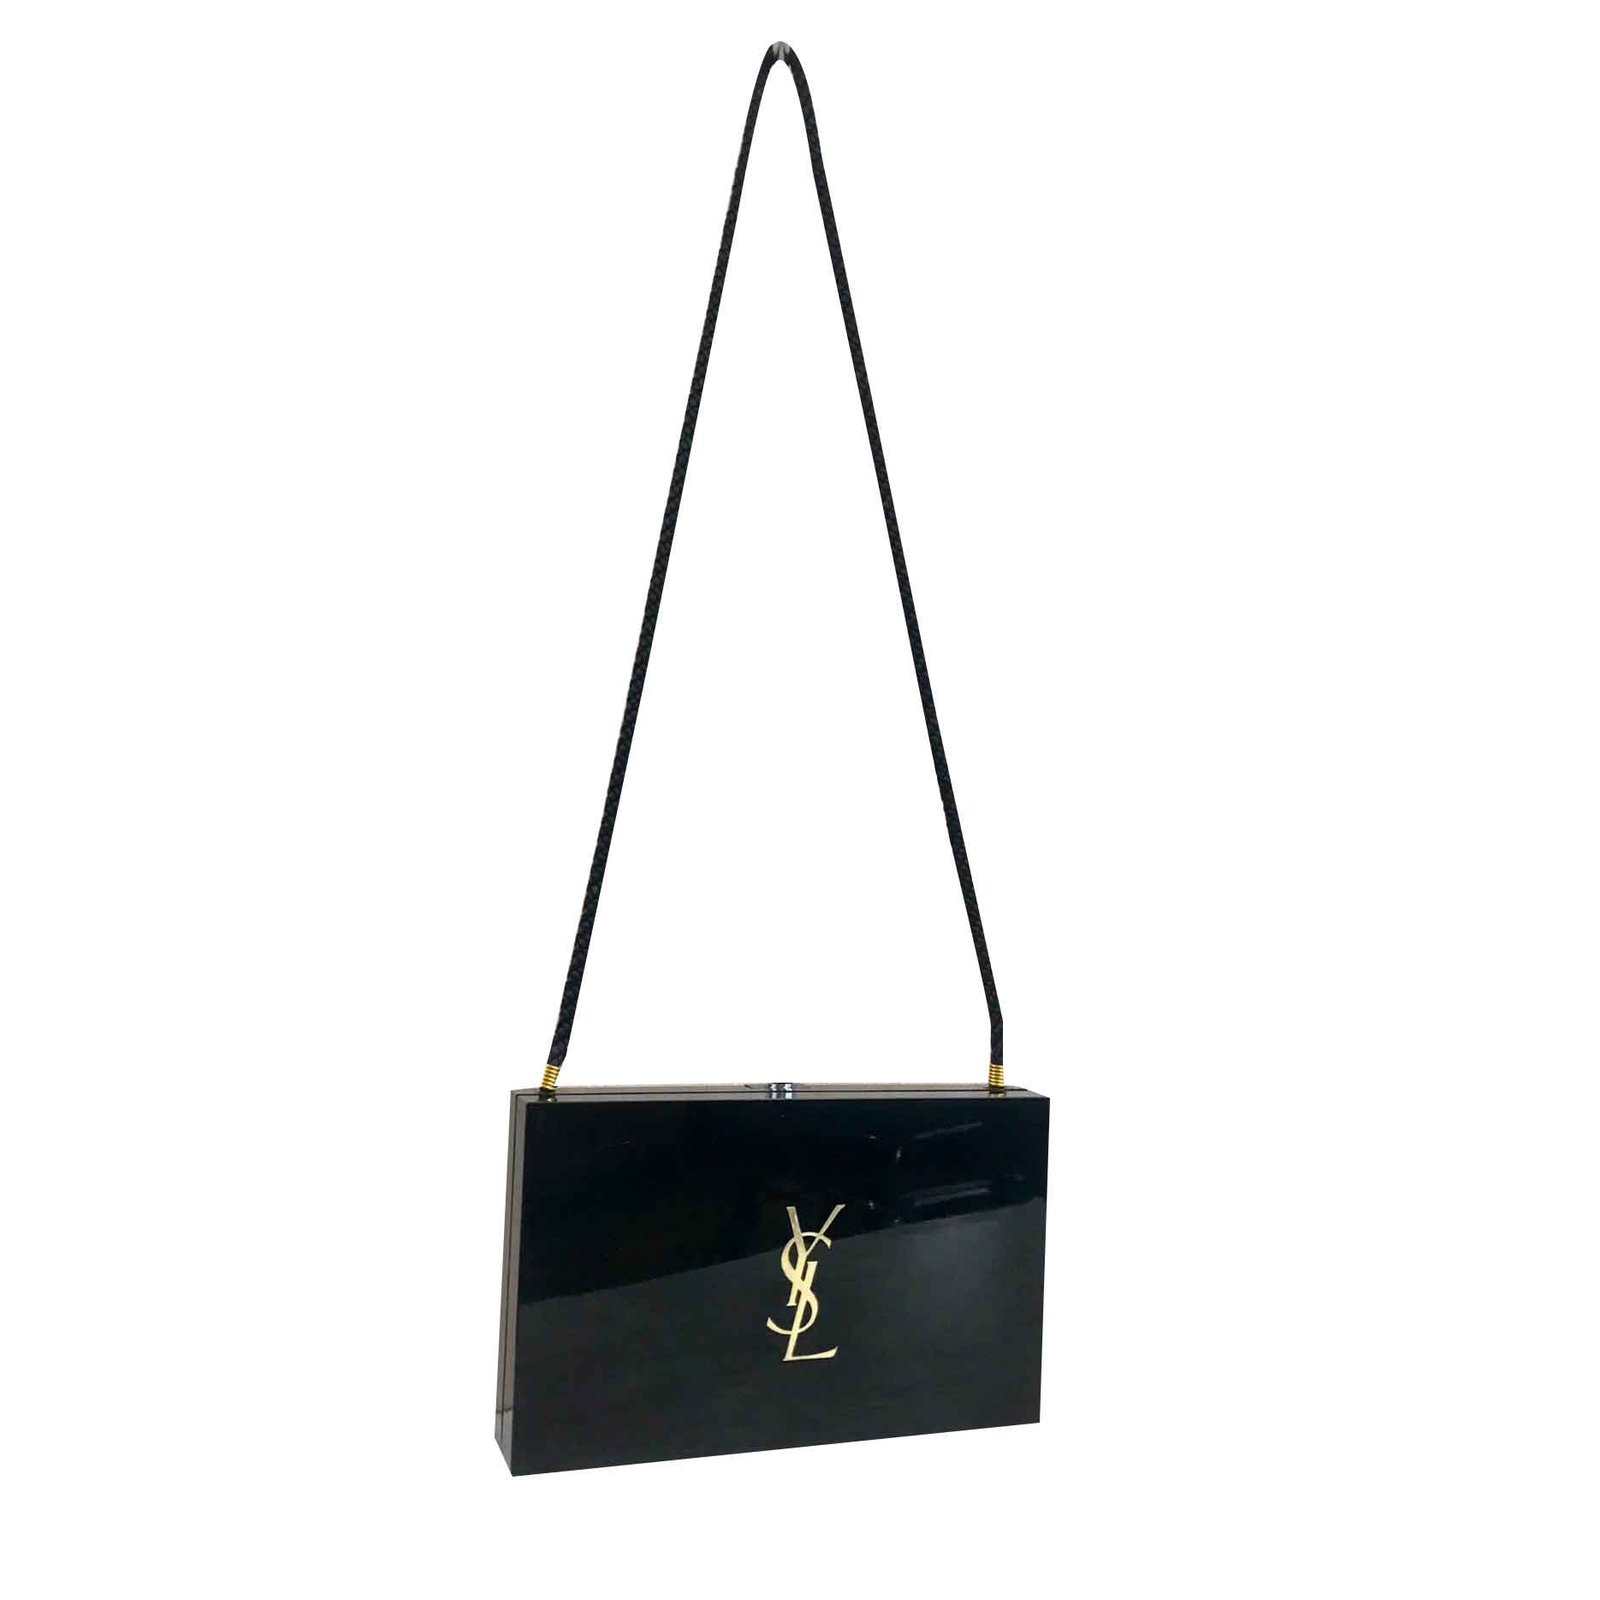 Yves Saint Laurent Pouch Makeup Cosmetic Bags